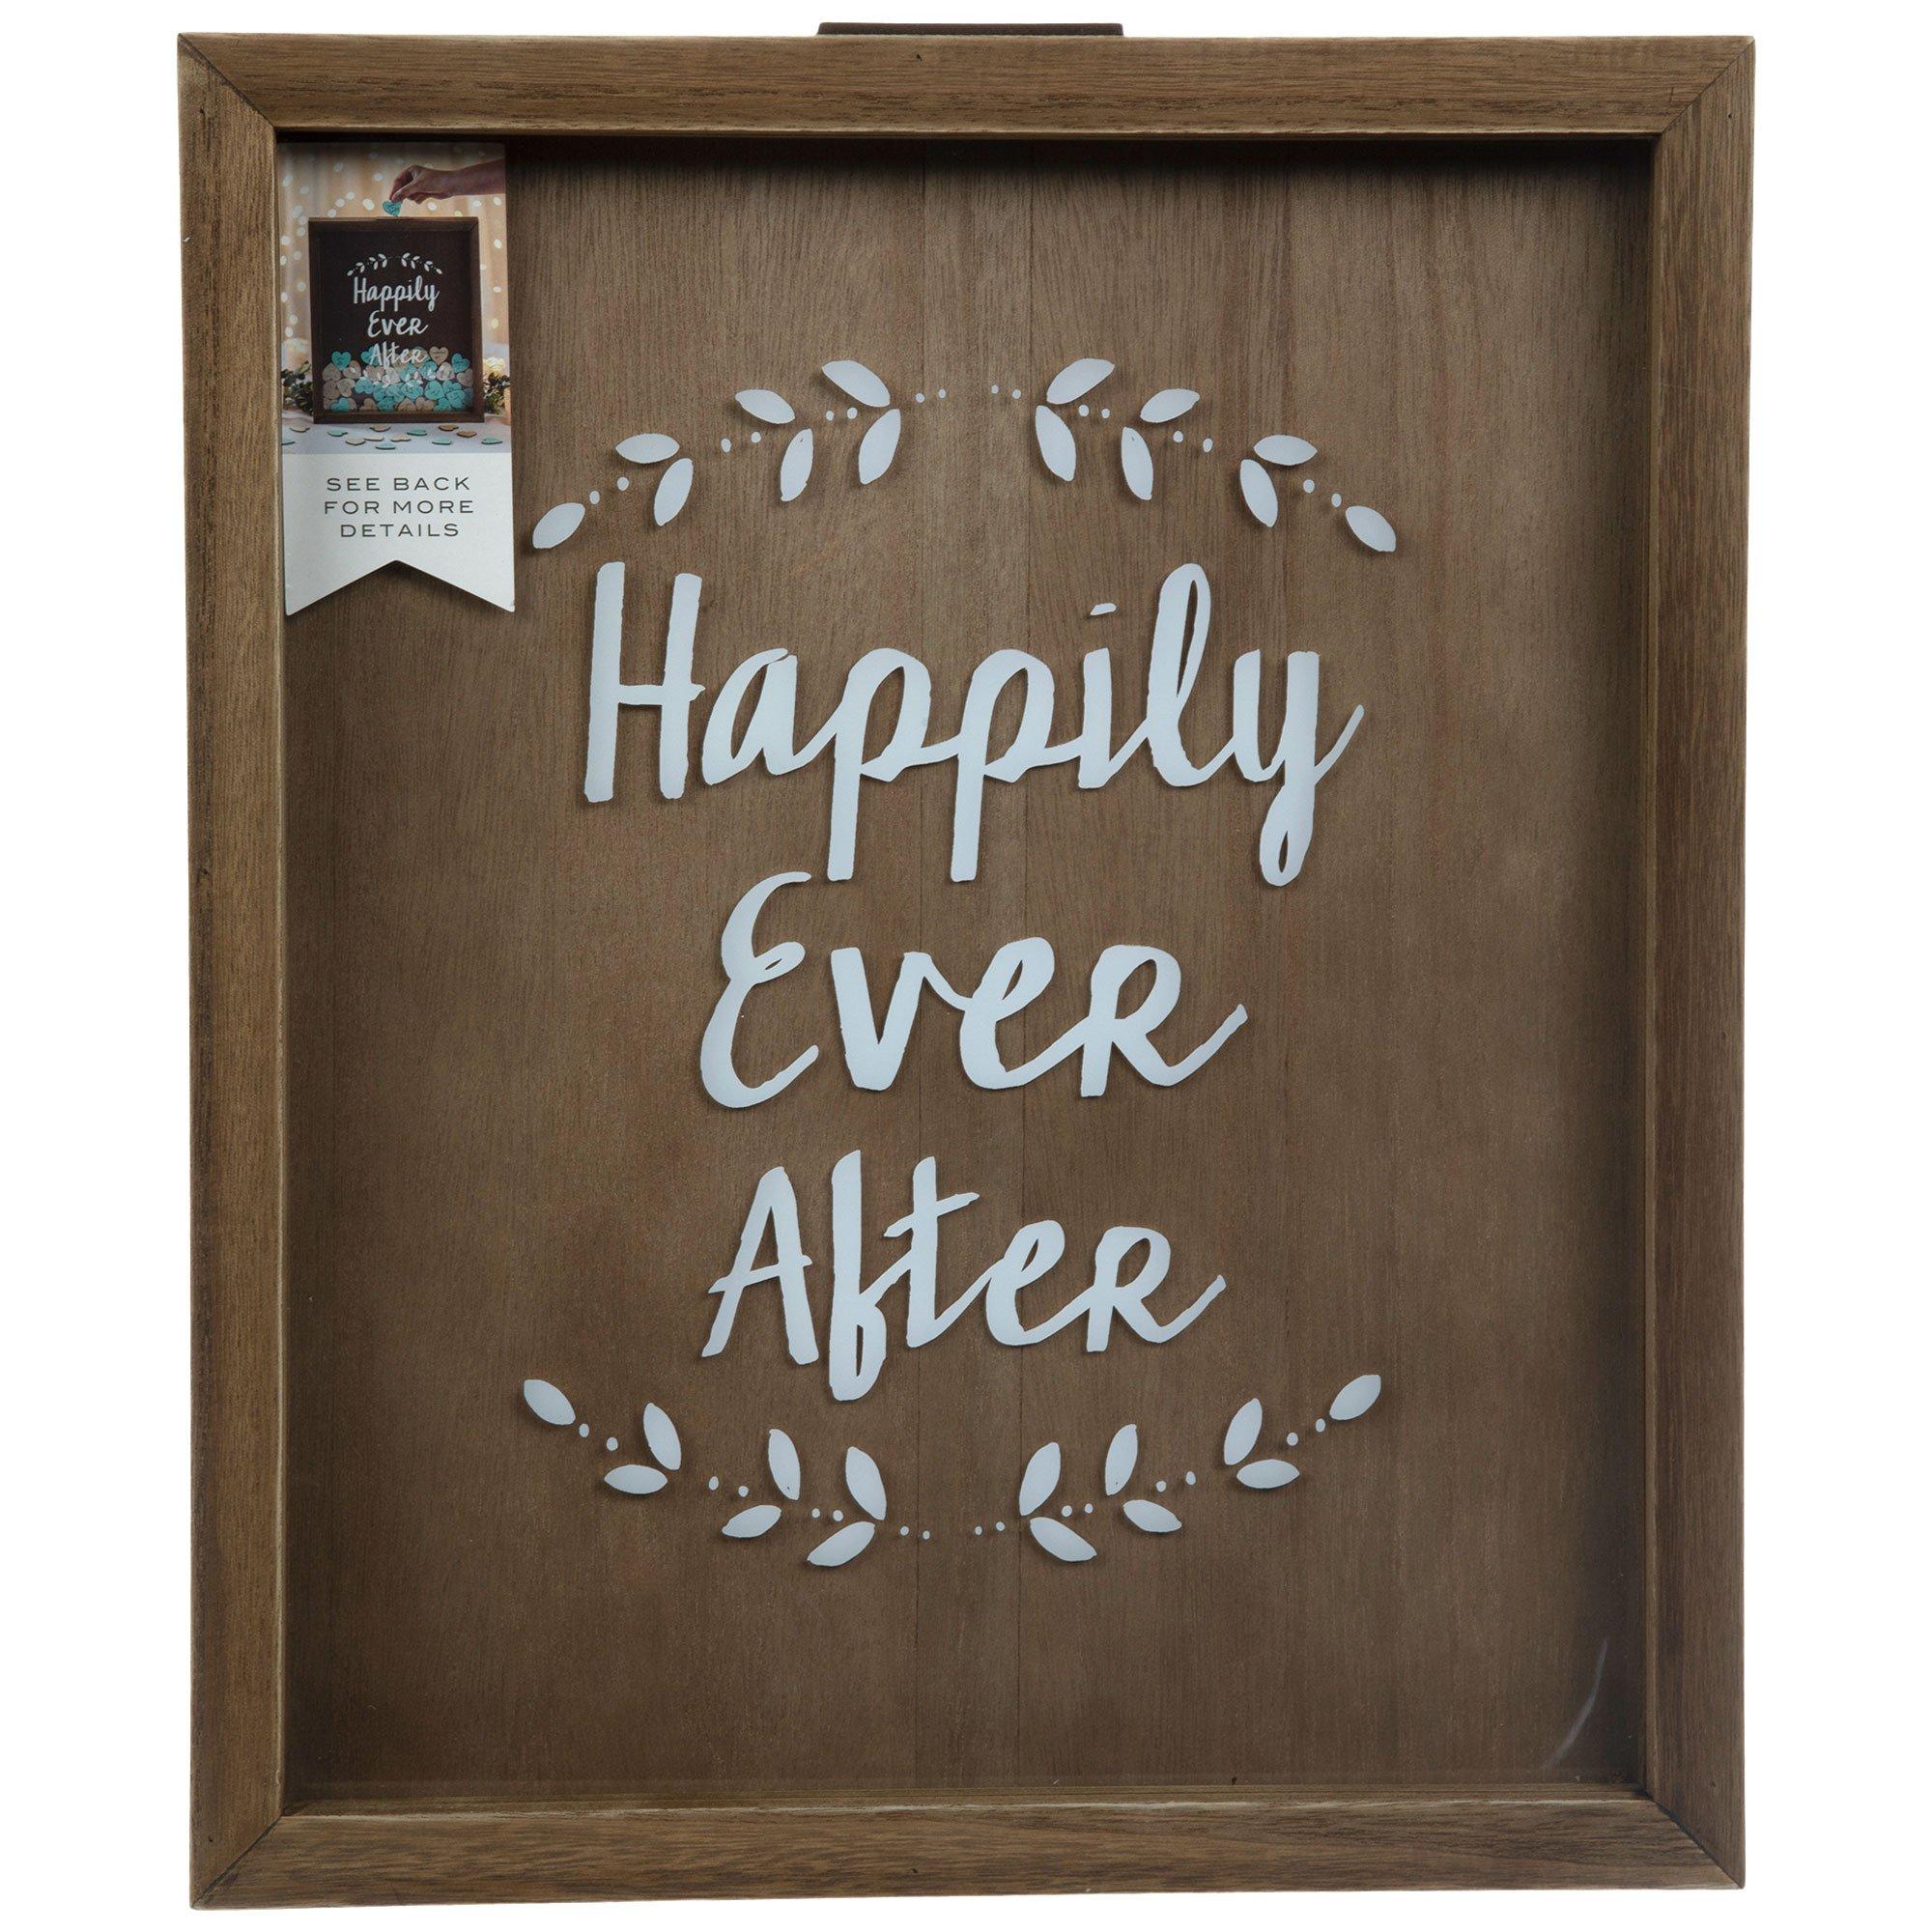 Ever After Wood Wedding Guest Book, Wedding Album Gifts